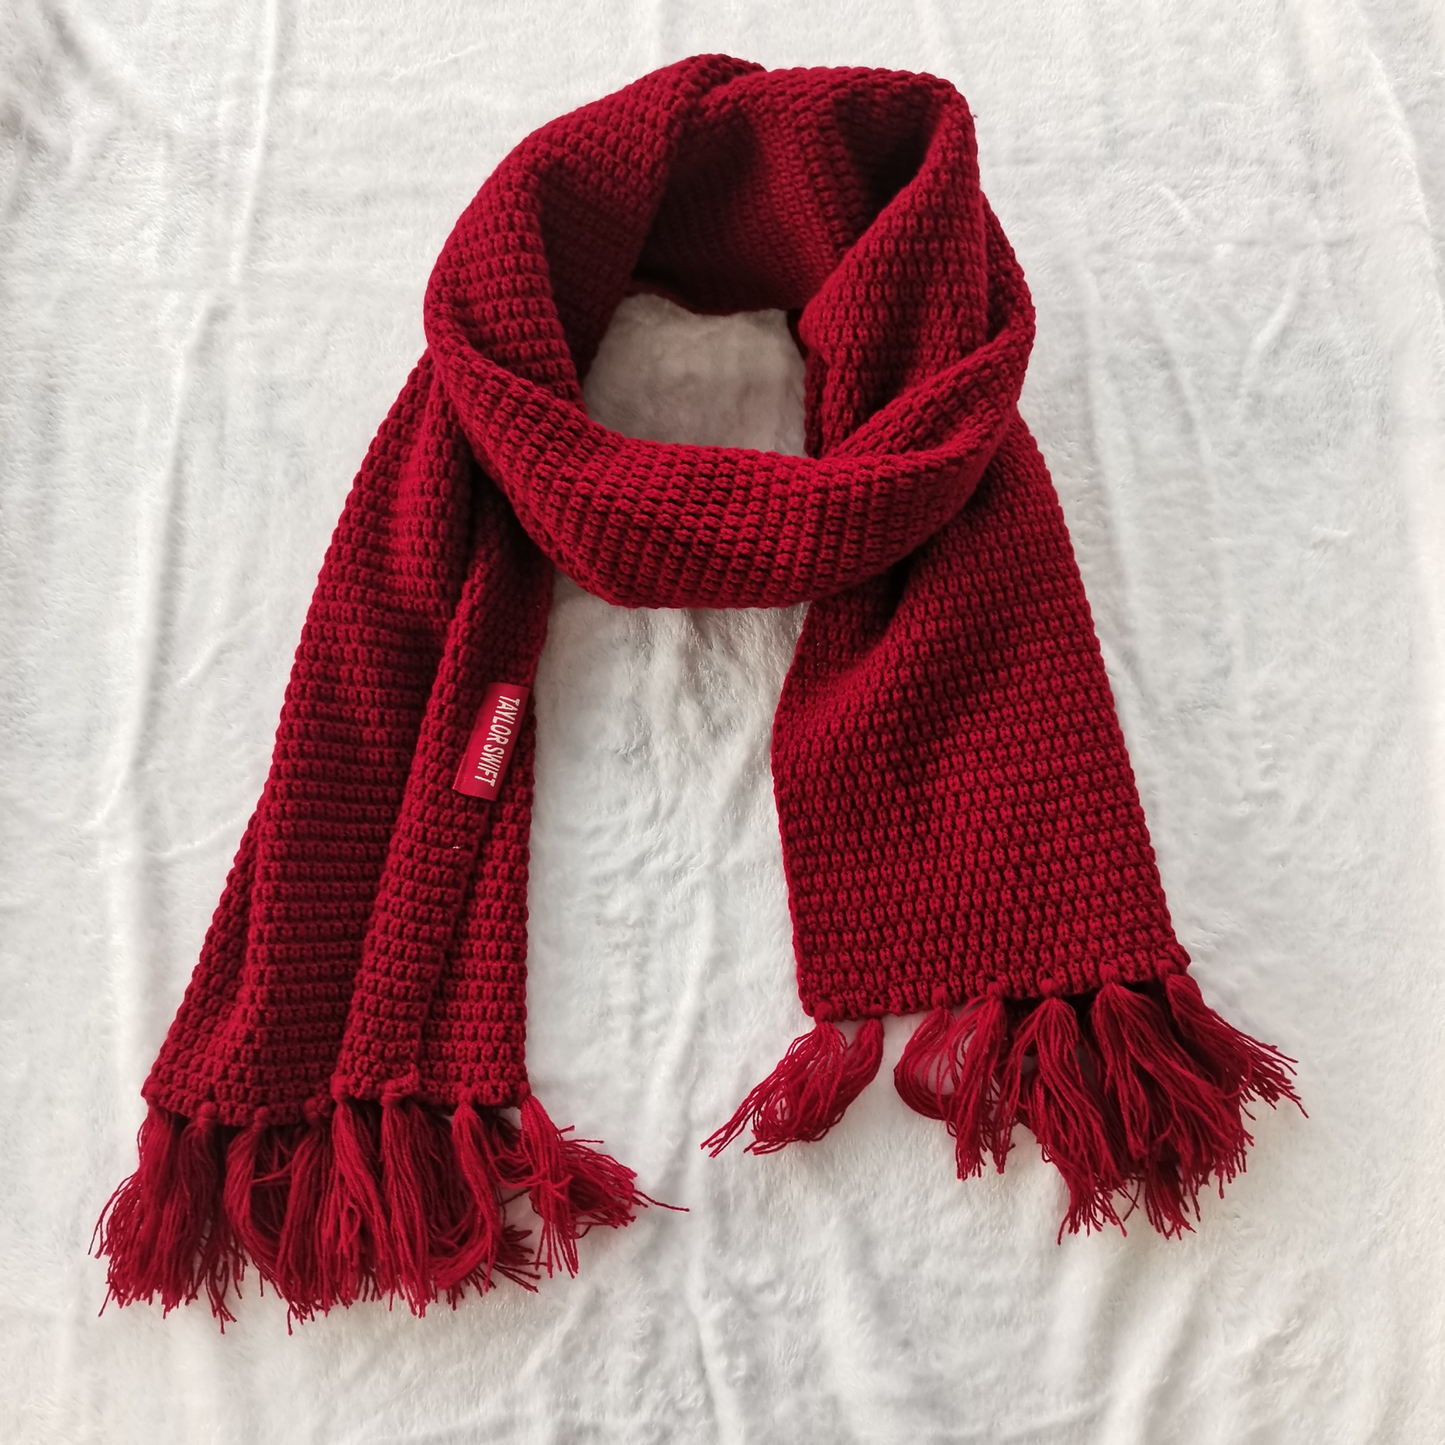 red scarf taylor swift, taylor swift scarf